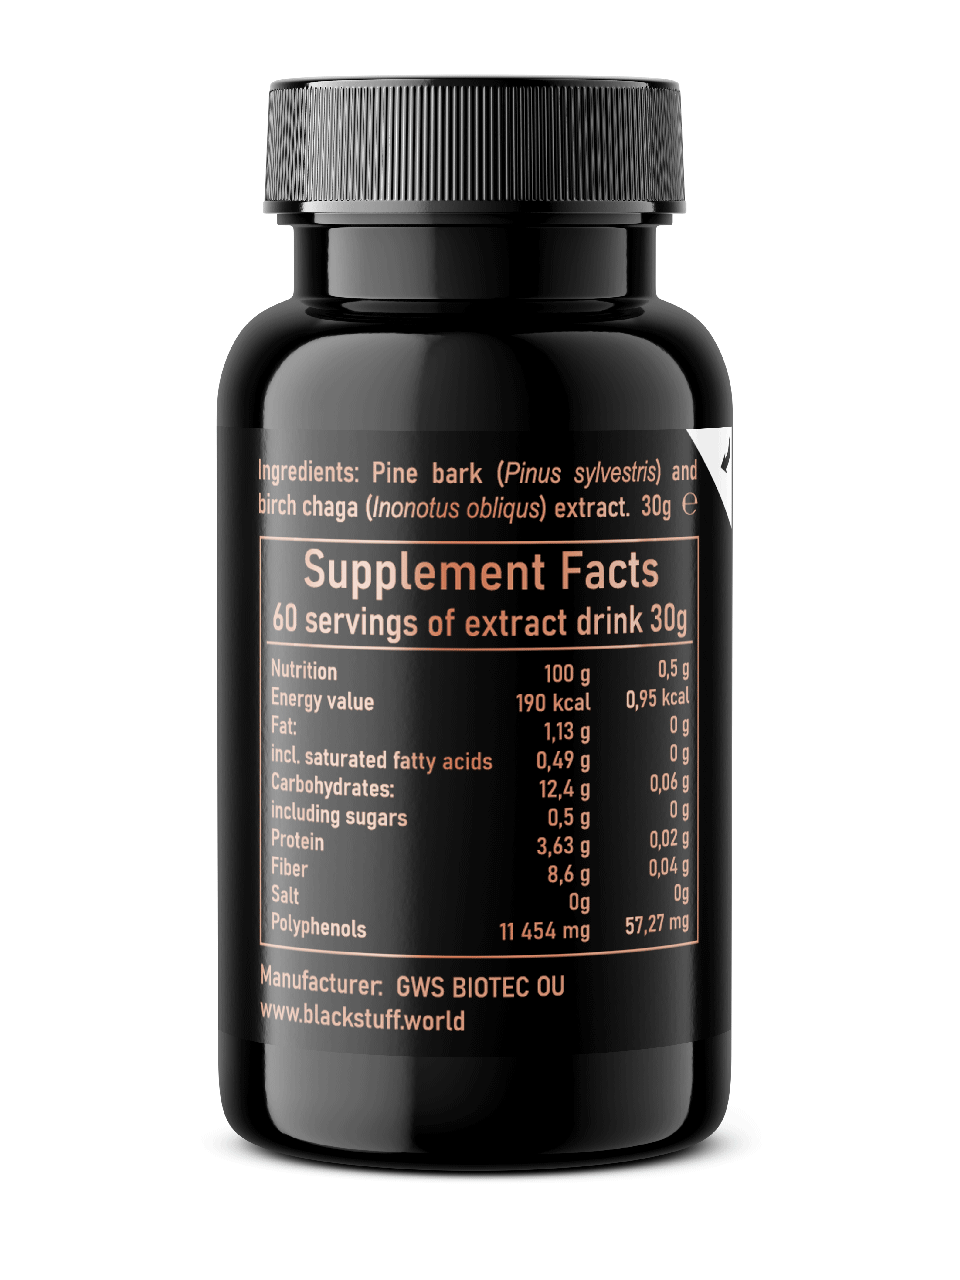 Image of the Black Stuff 30 day supplement bottle, featuring a sleek black design with the Black Stuff logo prominently displayed on the label.